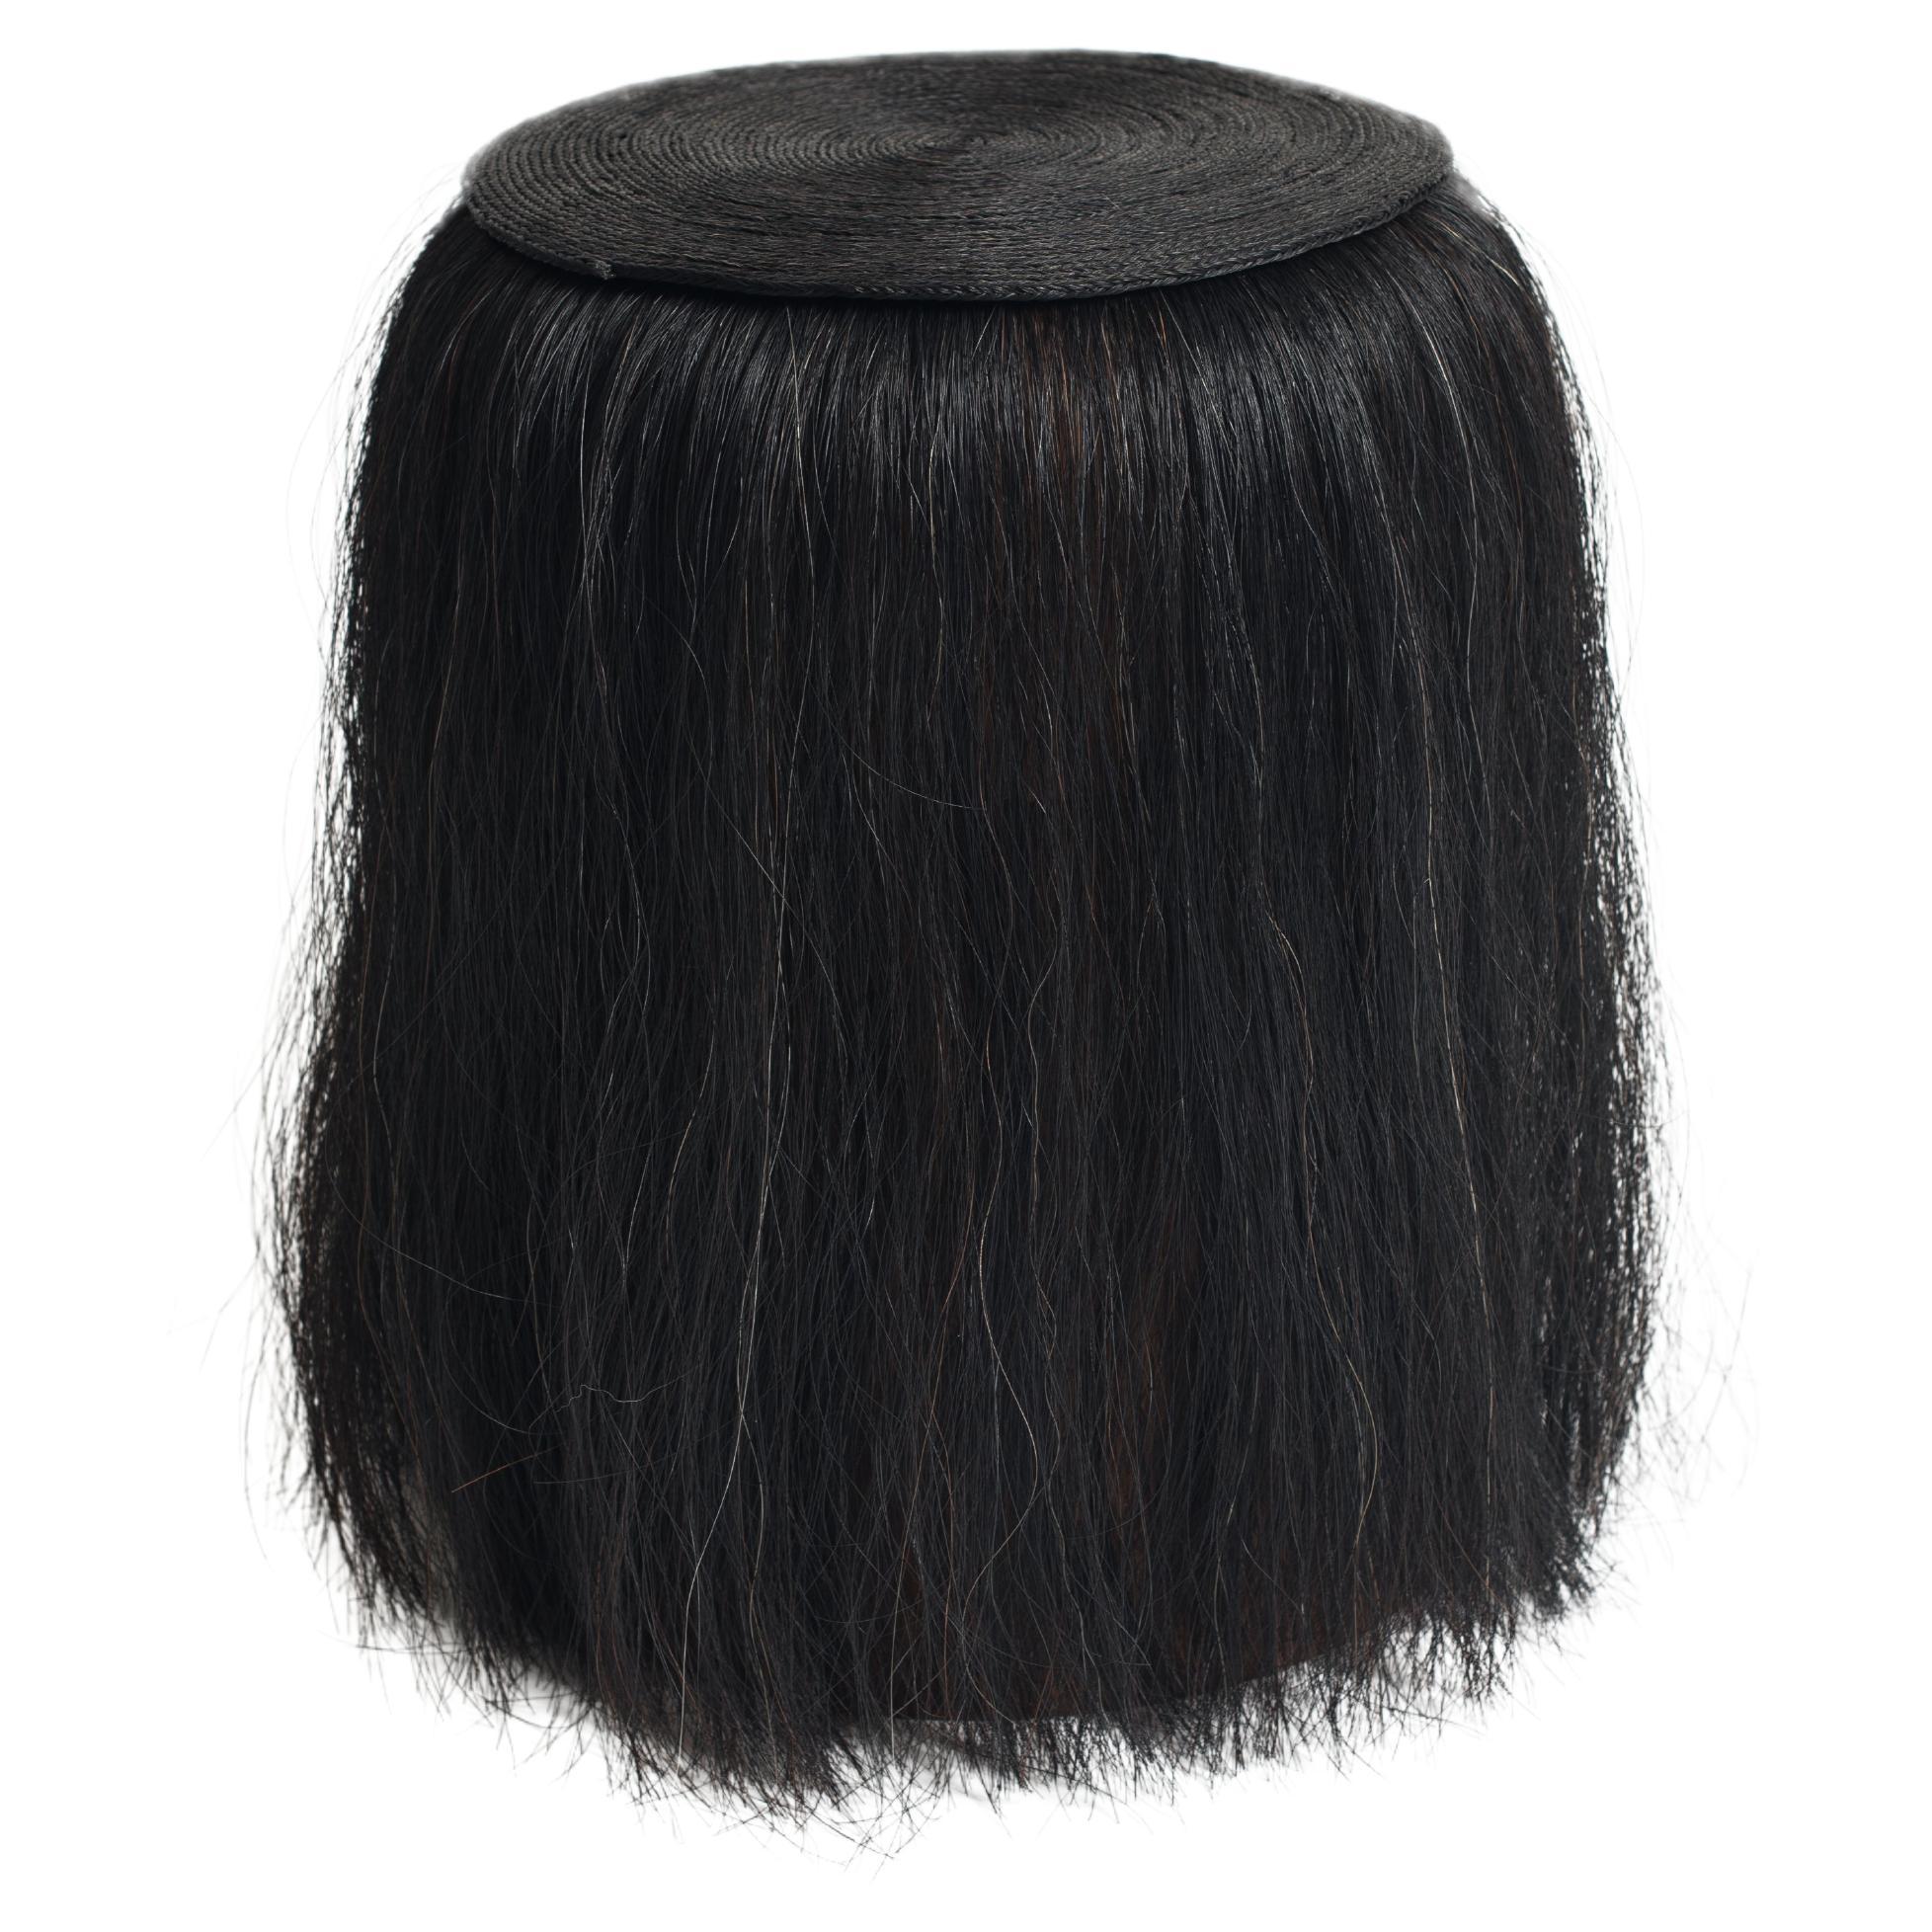 Cuaco Stool - Black handwoven horsehair solid wood stool from Mexico. For Sale